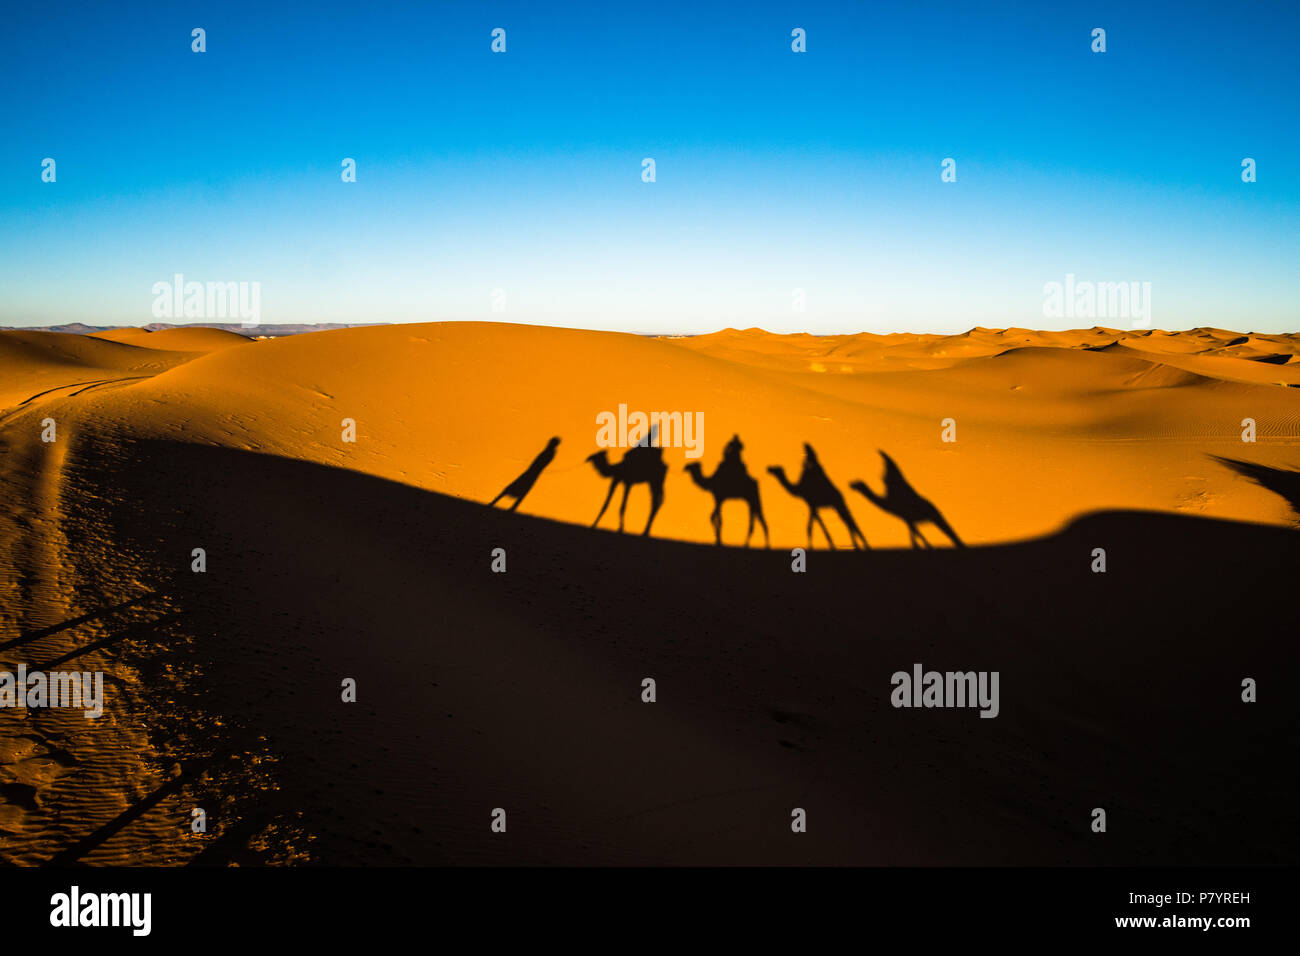 Wide angle shot of people riding camels in caravan over the sand dunes in Sahara desert with camel shadows on a sand Stock Photo